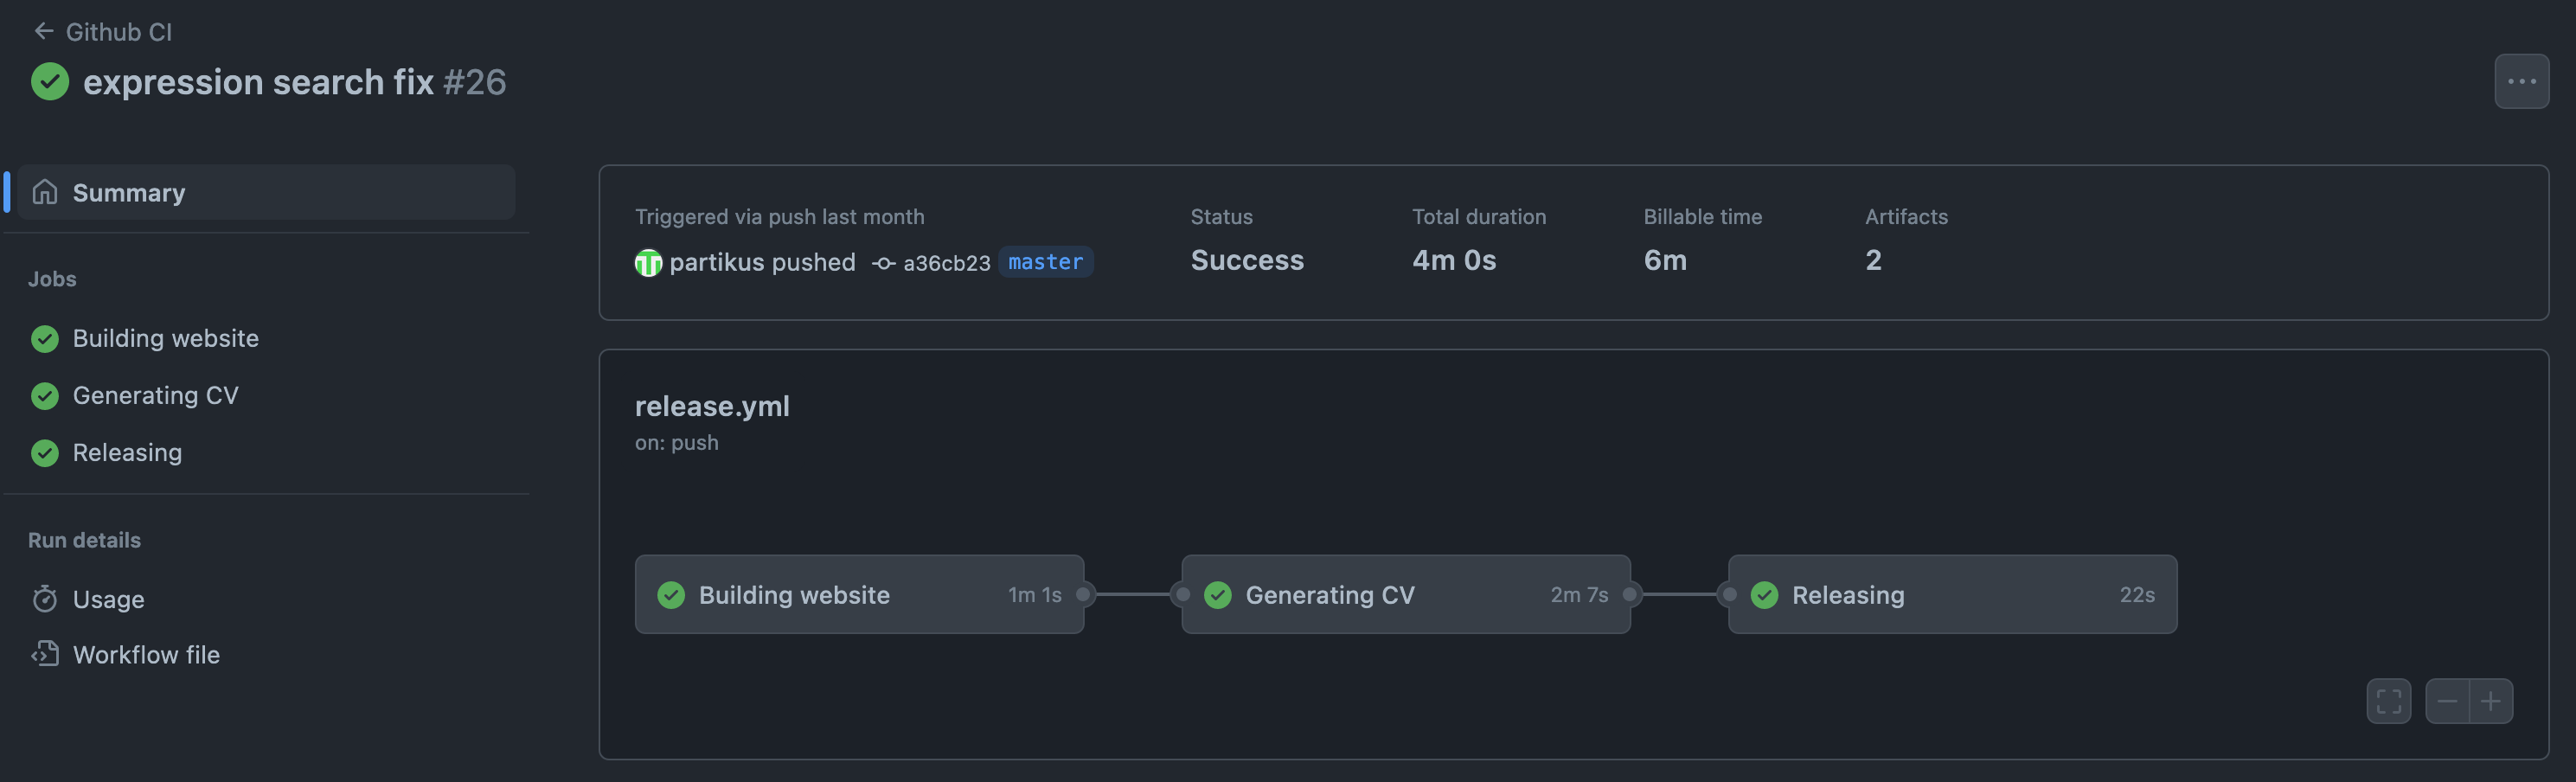 GitHub Actions Pipeline - overview